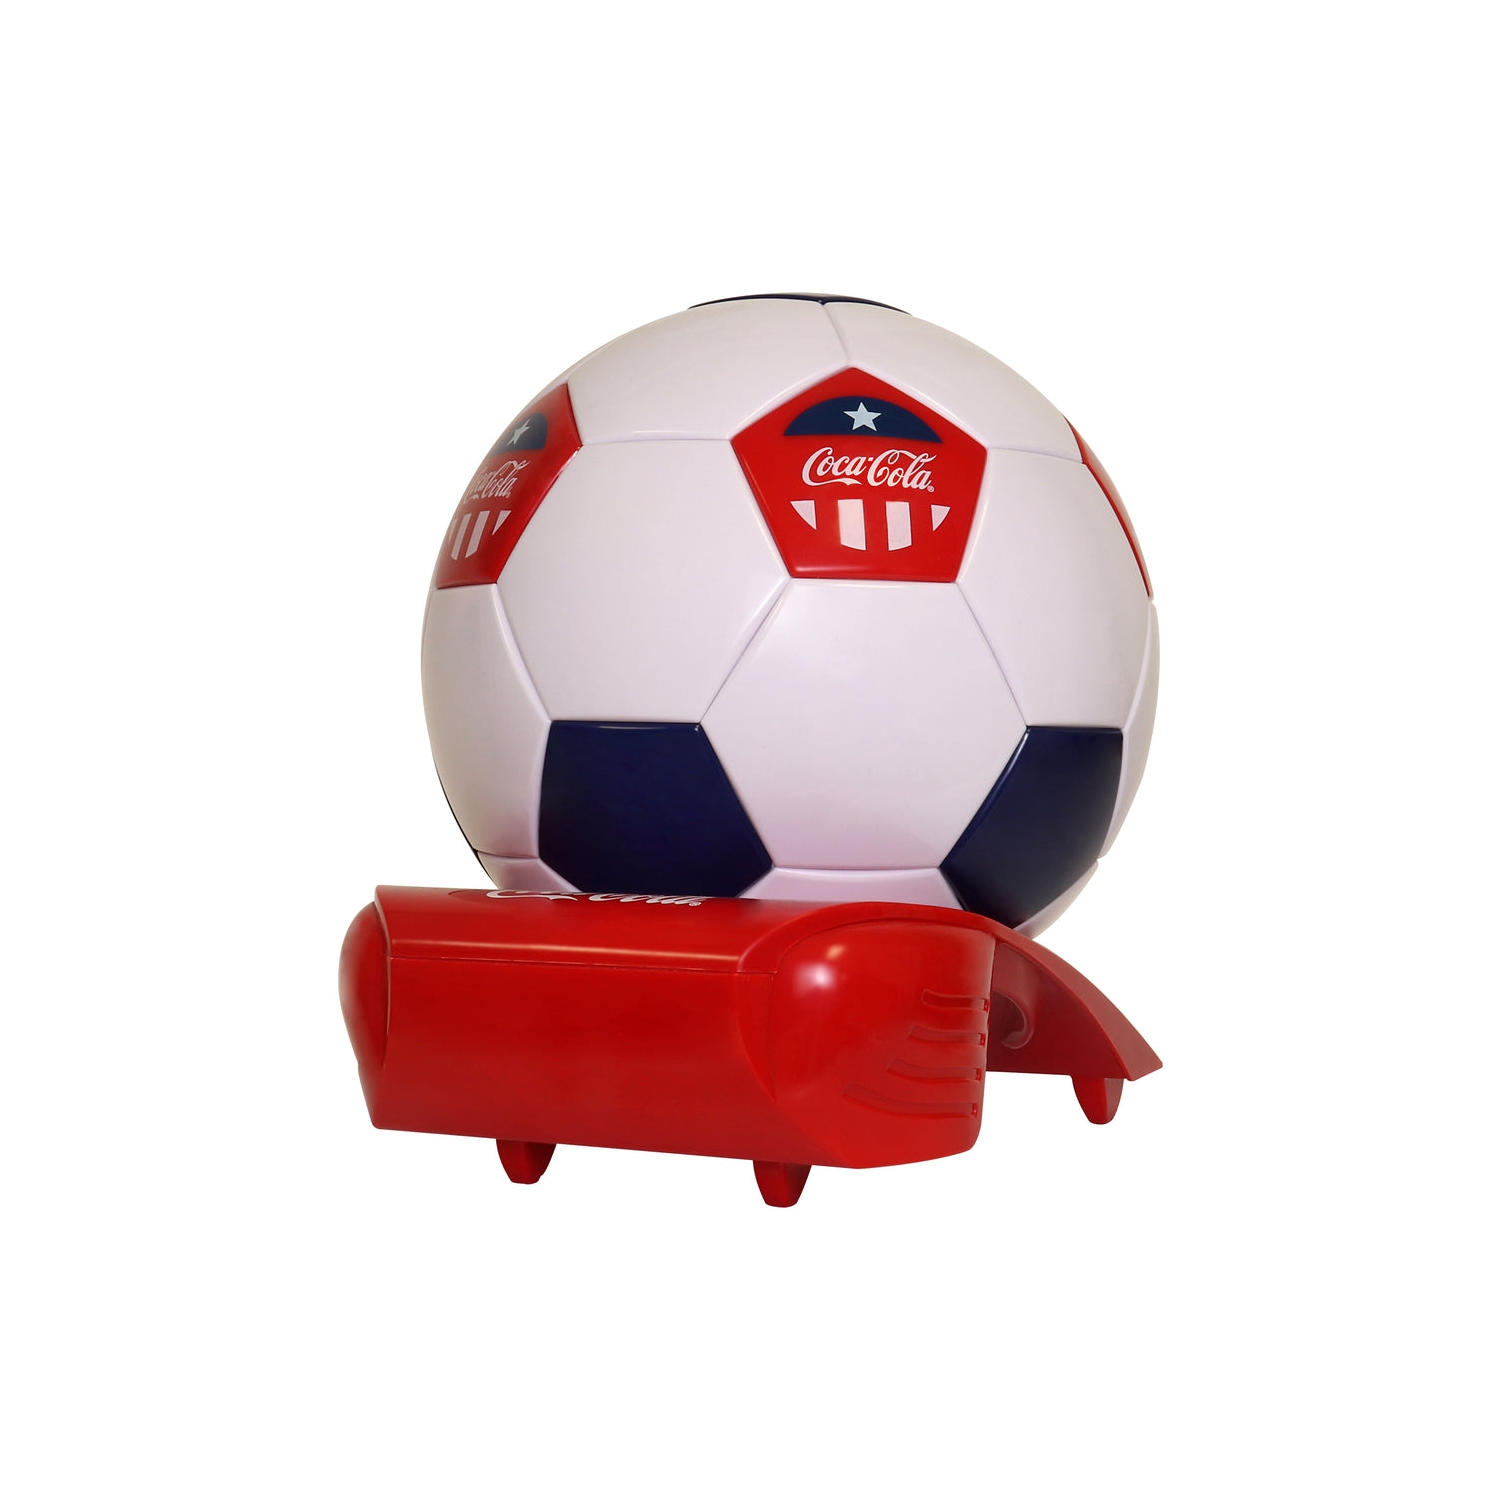 Coca-Cola Soccer Ball Mini Fridge, 5 Can Beverage Cooler with Hidden Opening, White Red Black, Games Room, Man-Cave, Dorm, Perfect Gift for Dad, Sports Fans, Students